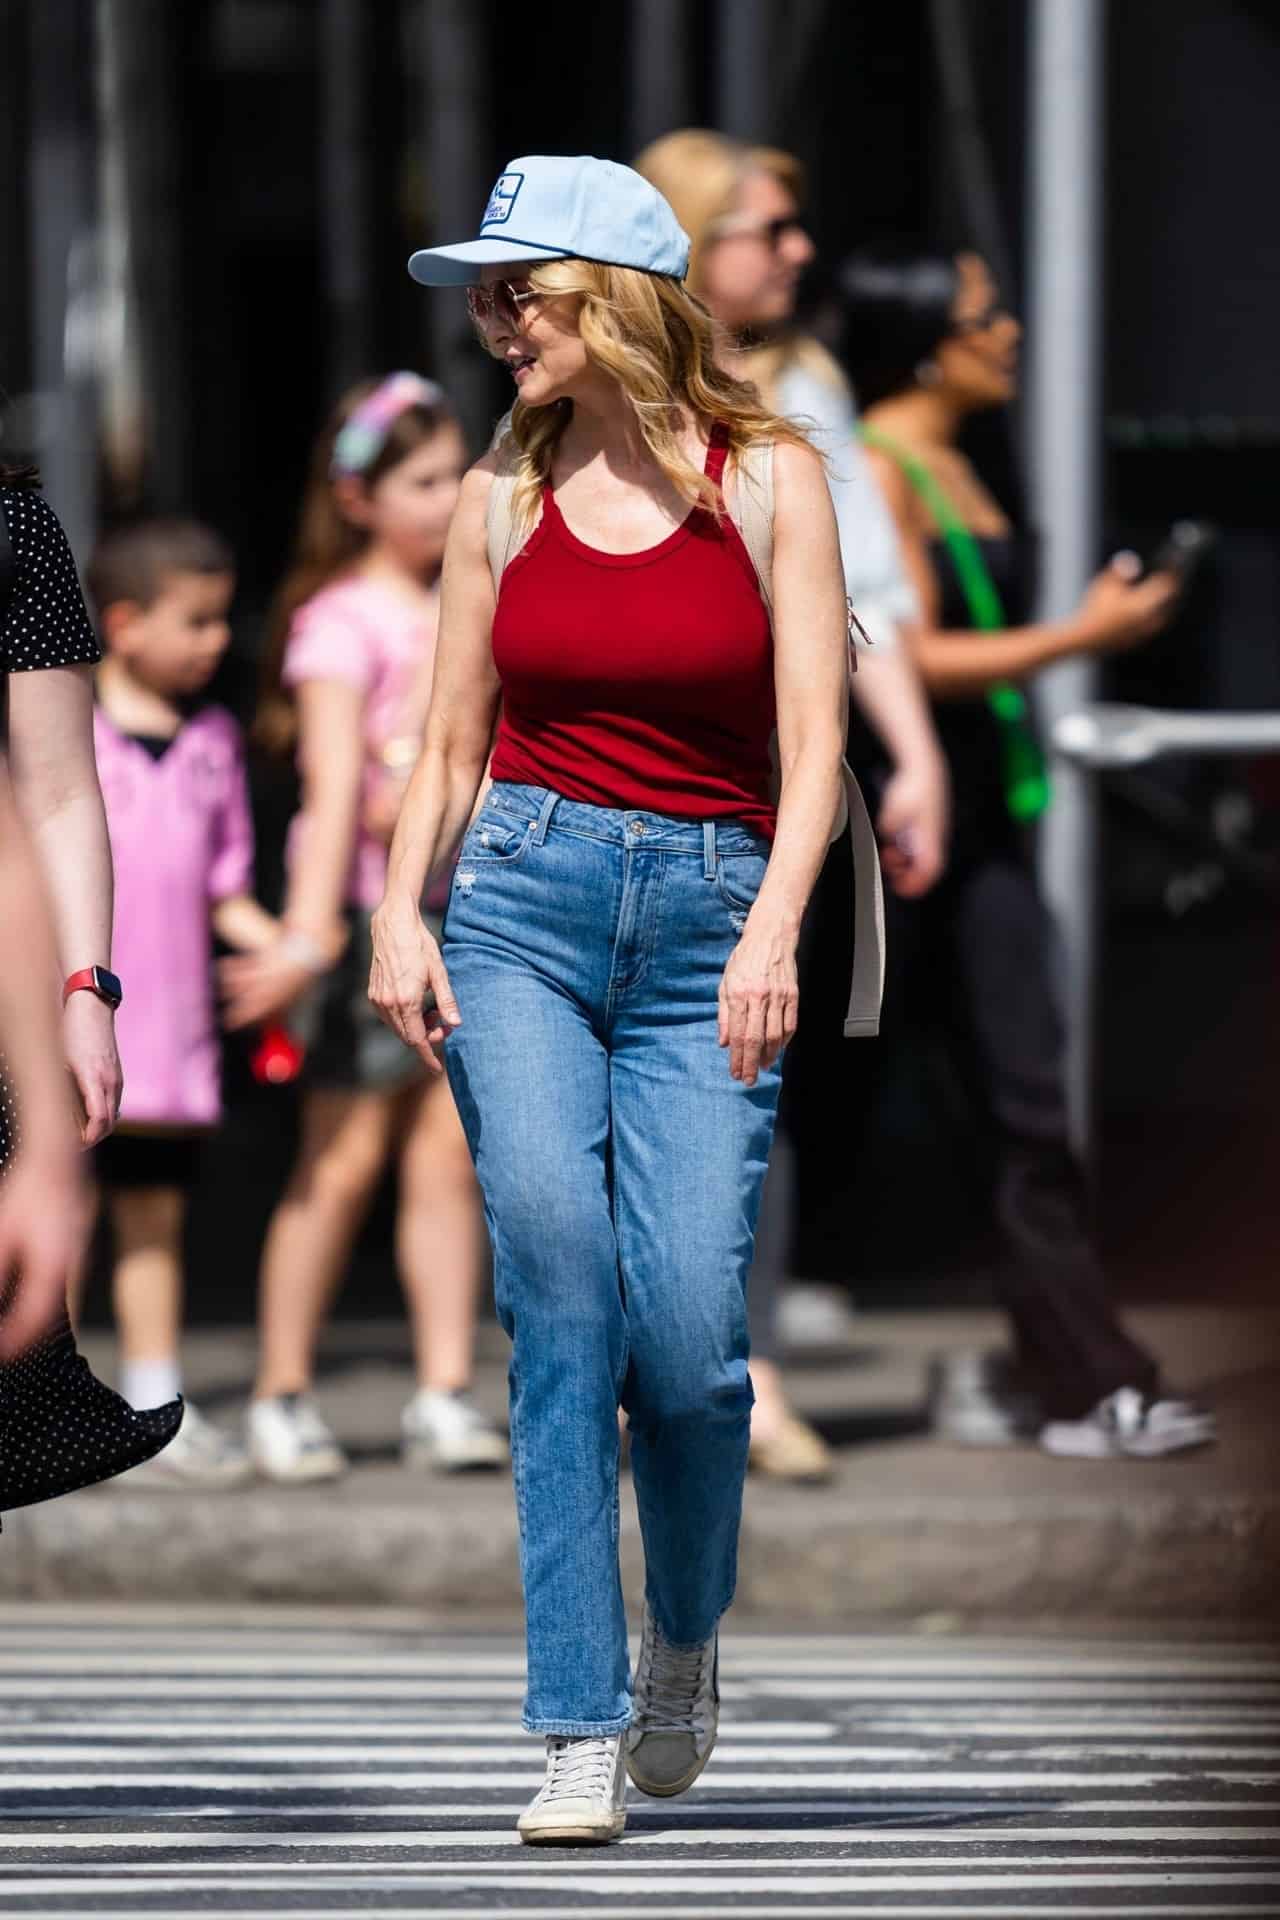 Heather Graham Looks Vintage Chic in a Red Tank Top and Jeans